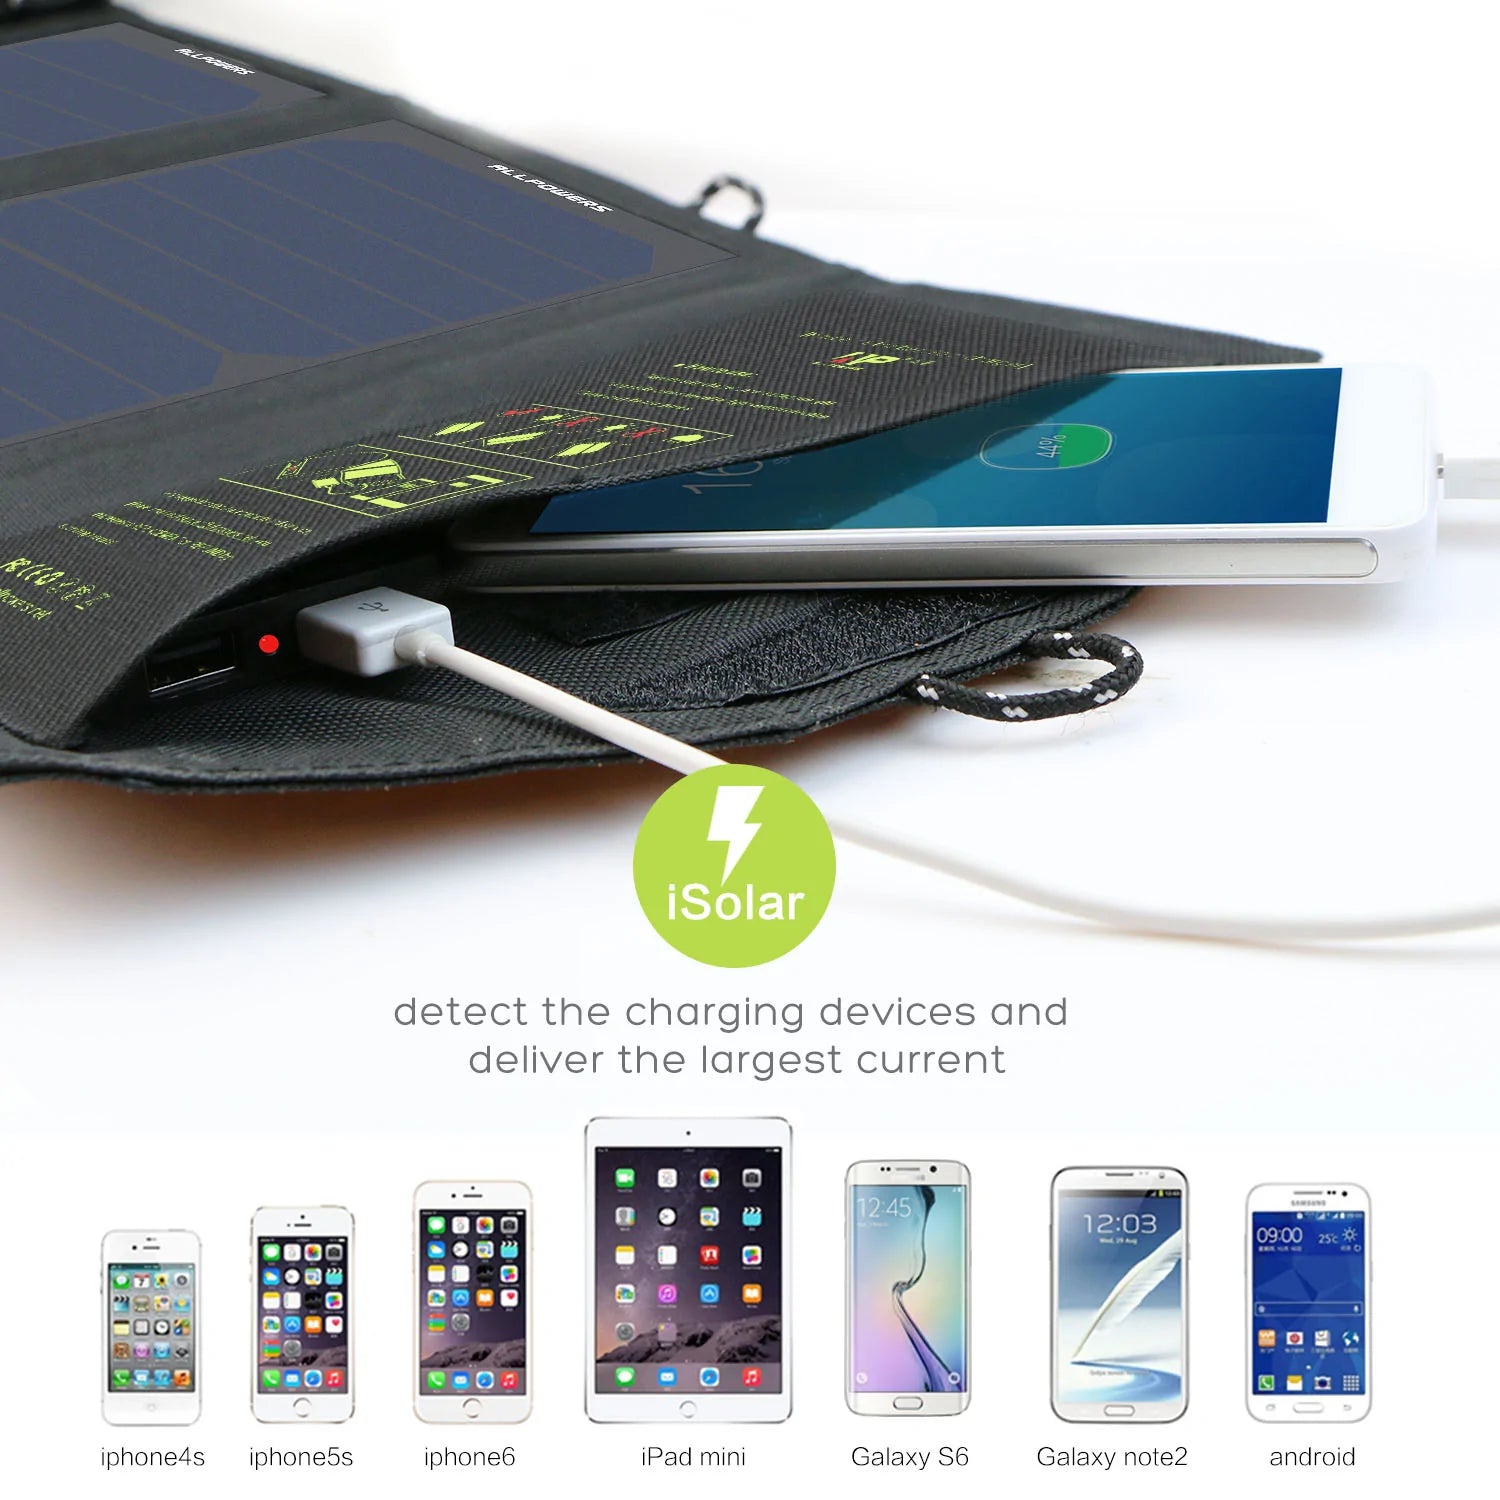 ALLPOWERS 5V 21W Portable Solar Panel Charger(No built-in battery)